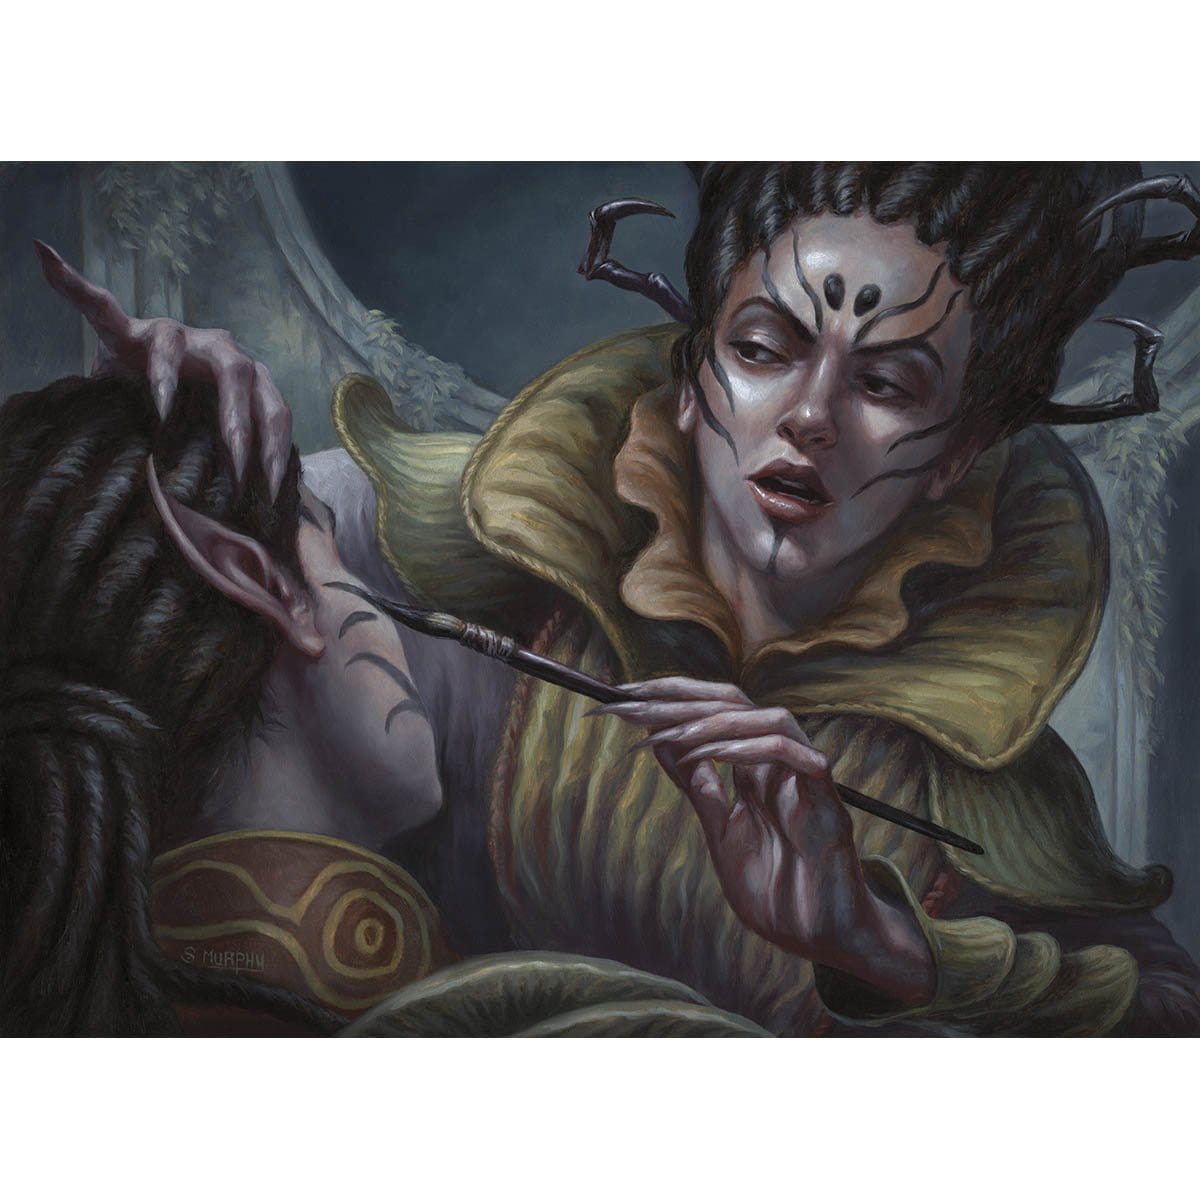 Moodmark Painter Print - Print - Original Magic Art - Accessories for Magic the Gathering and other card games